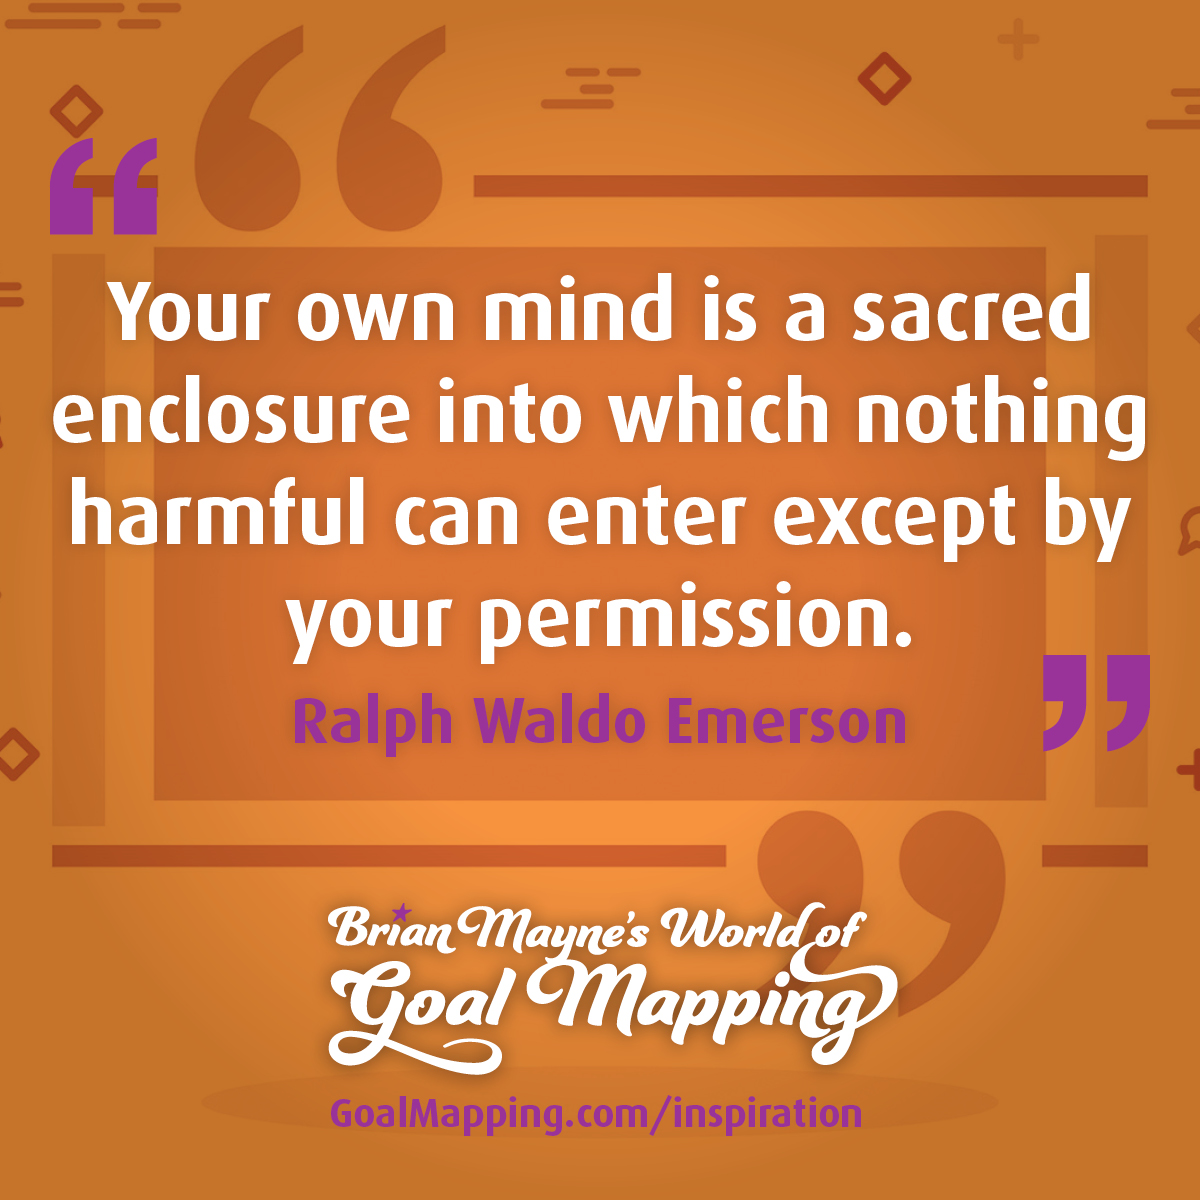 "Your own mind is a sacred enclosure into which nothing harmful can enter except by your permission." Ralph Waldo Emerson